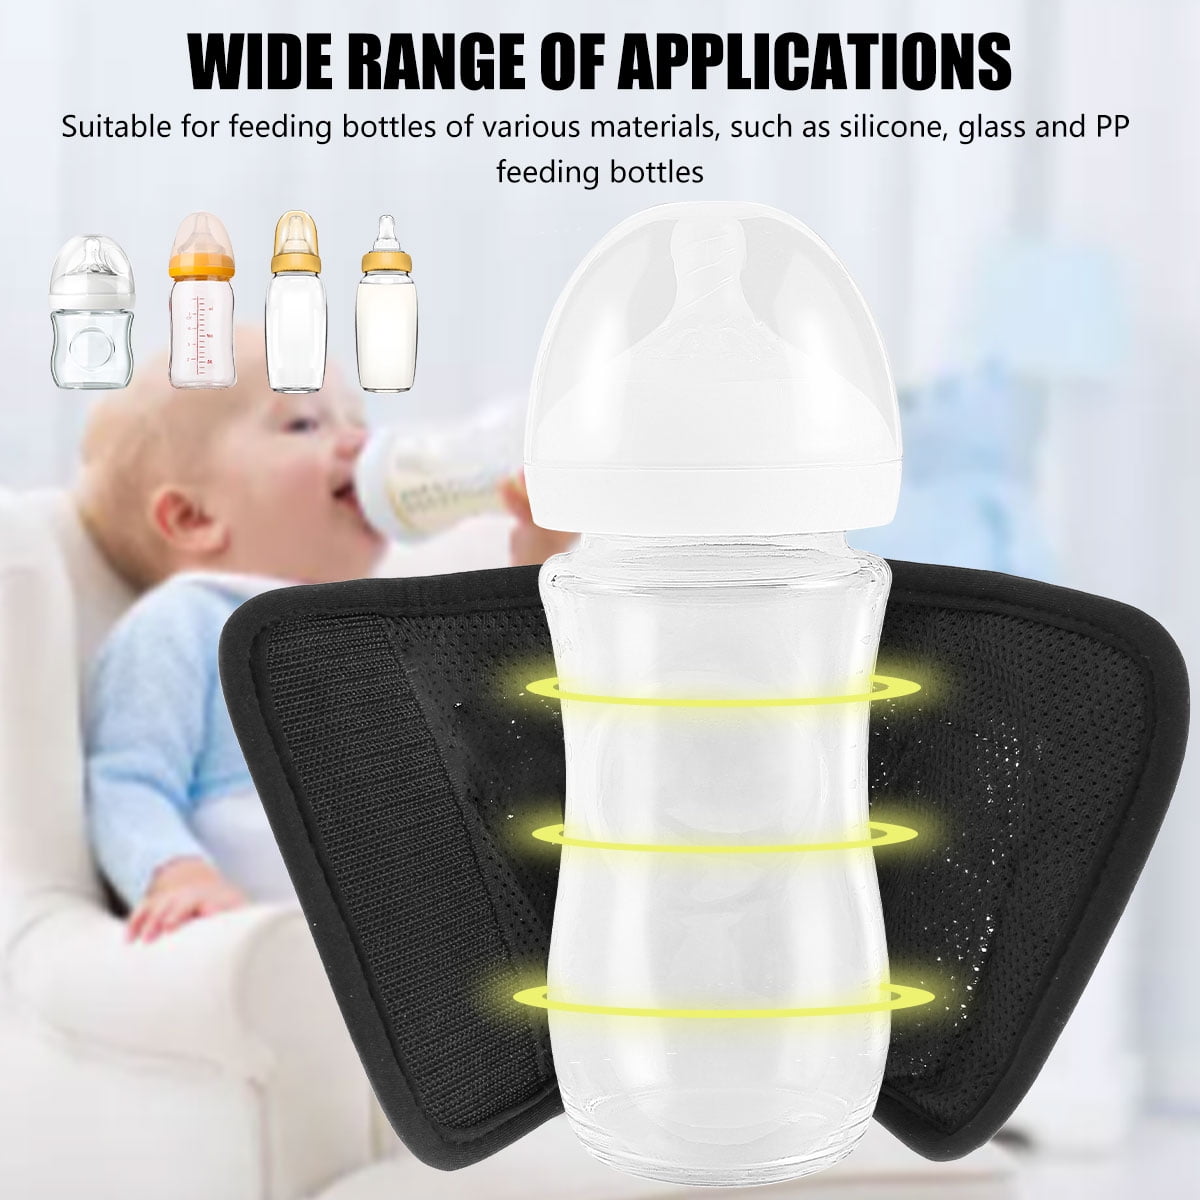 Mamatepe Upgrade Portable Bottle Warmer on The go, Travel Baby Breast Milk  Warmer for All Infant Bottles, Digital Water Temp Display Lid, BPA Free